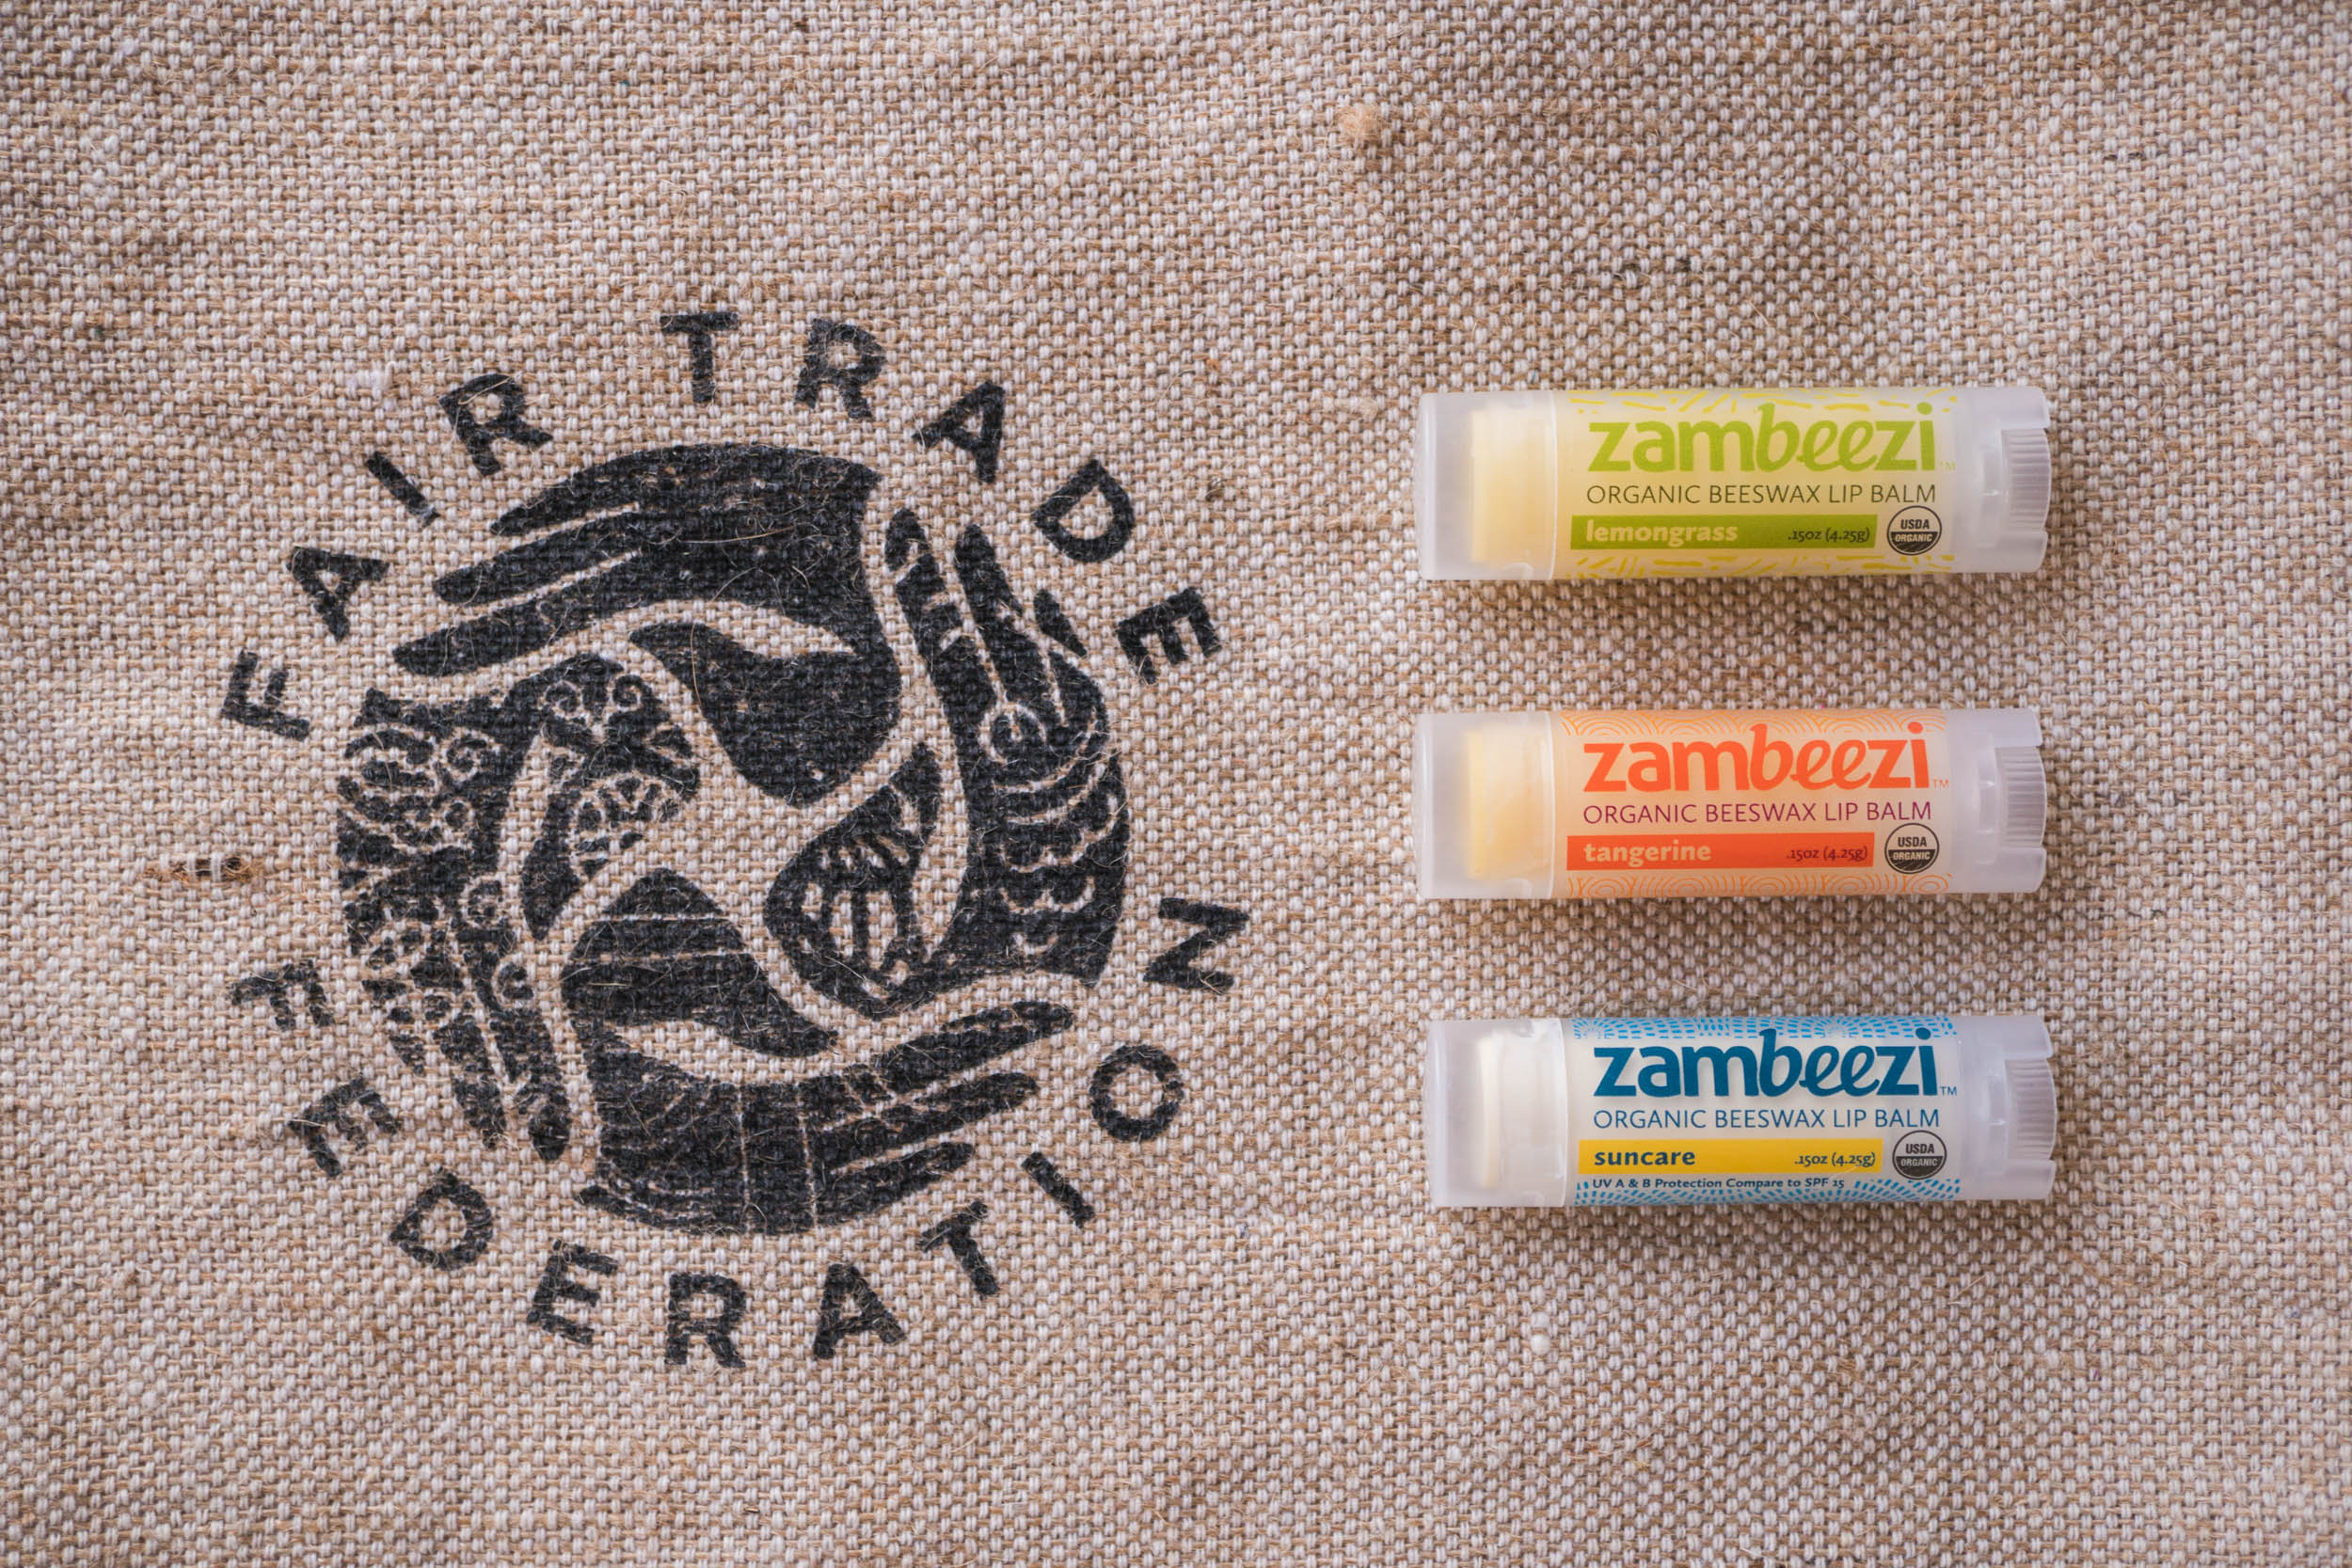 Zambeezi is a member of the Fair Trade Federation - the best organic lip balm begins with the farmer and their ingredients